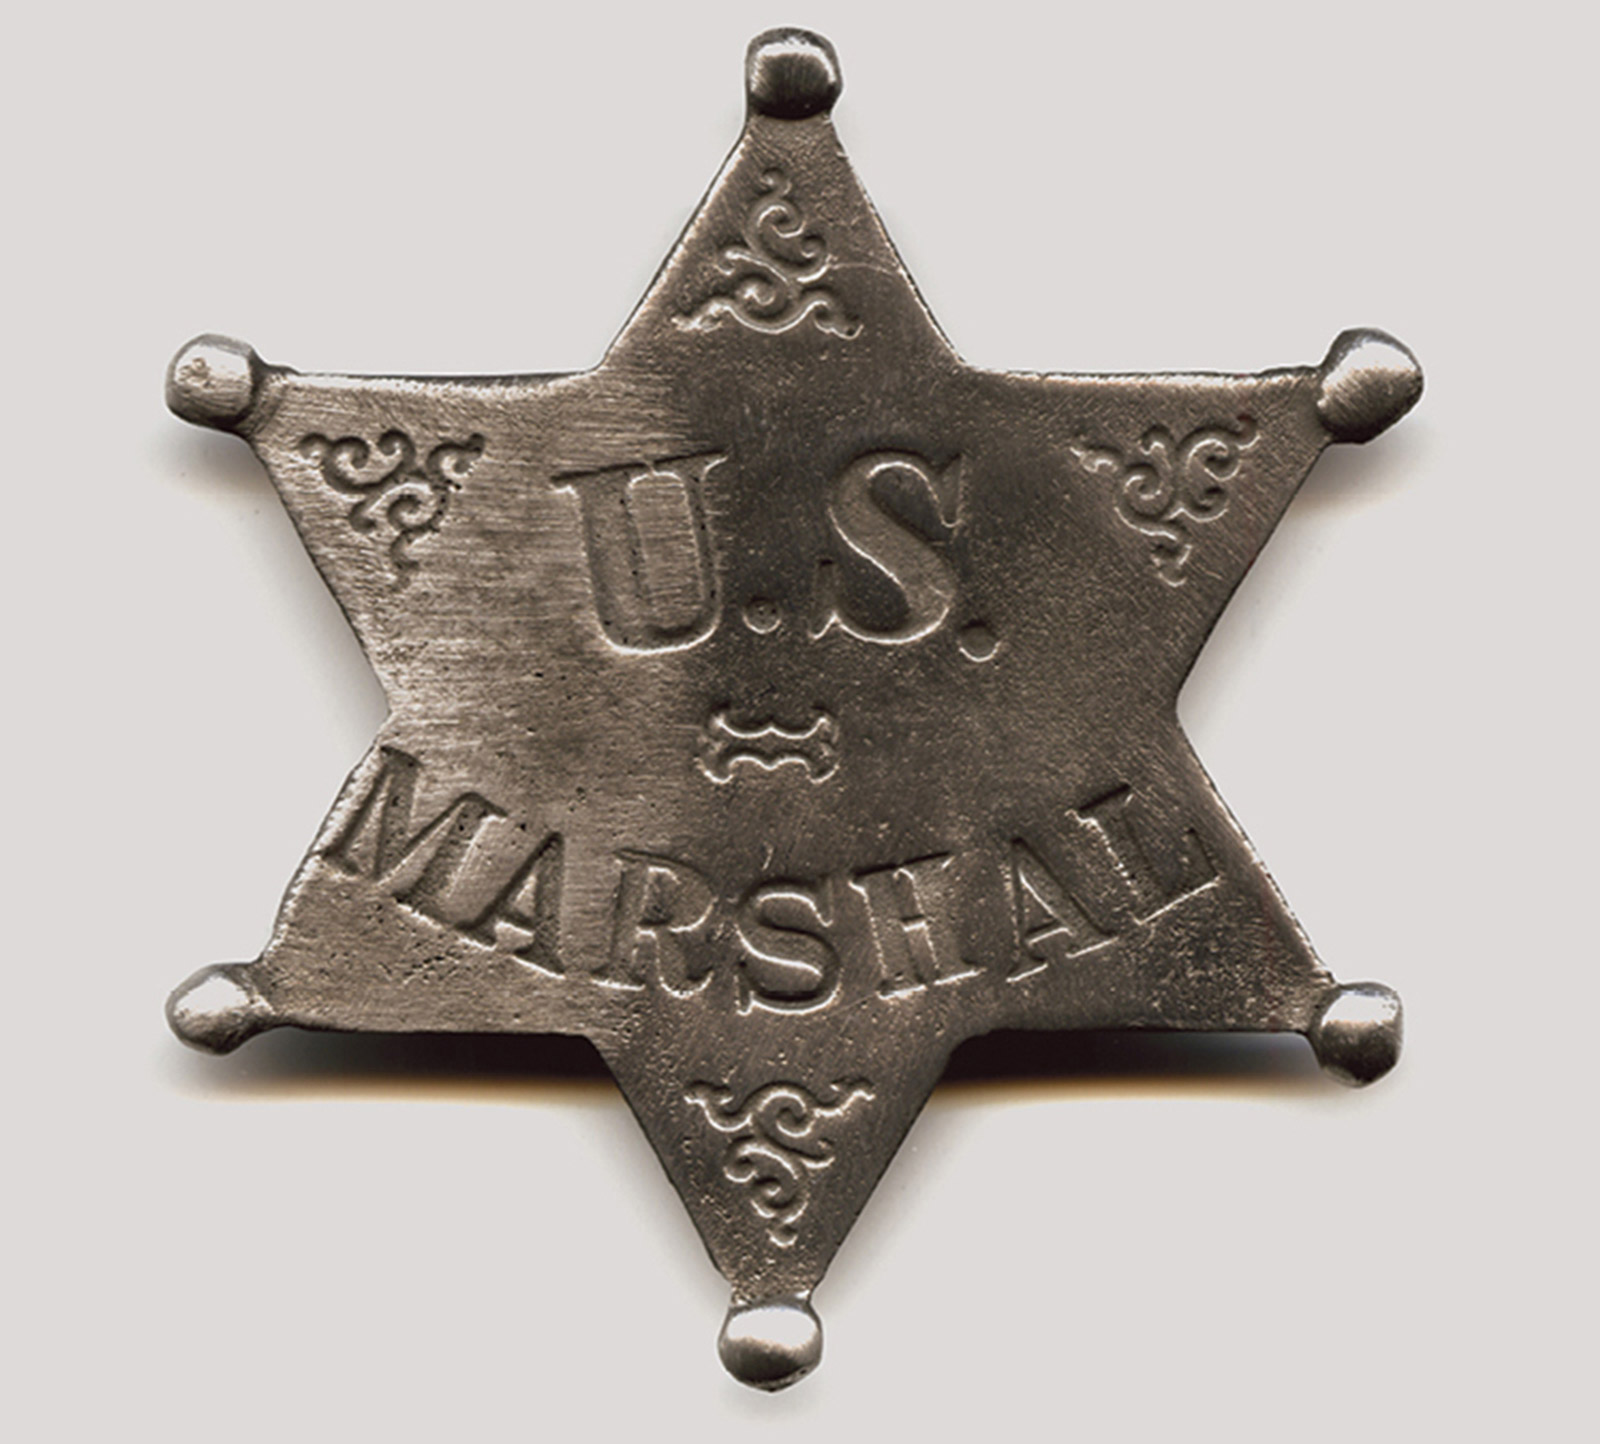 A US Marshal star badge replica in the shape of a hexagram.